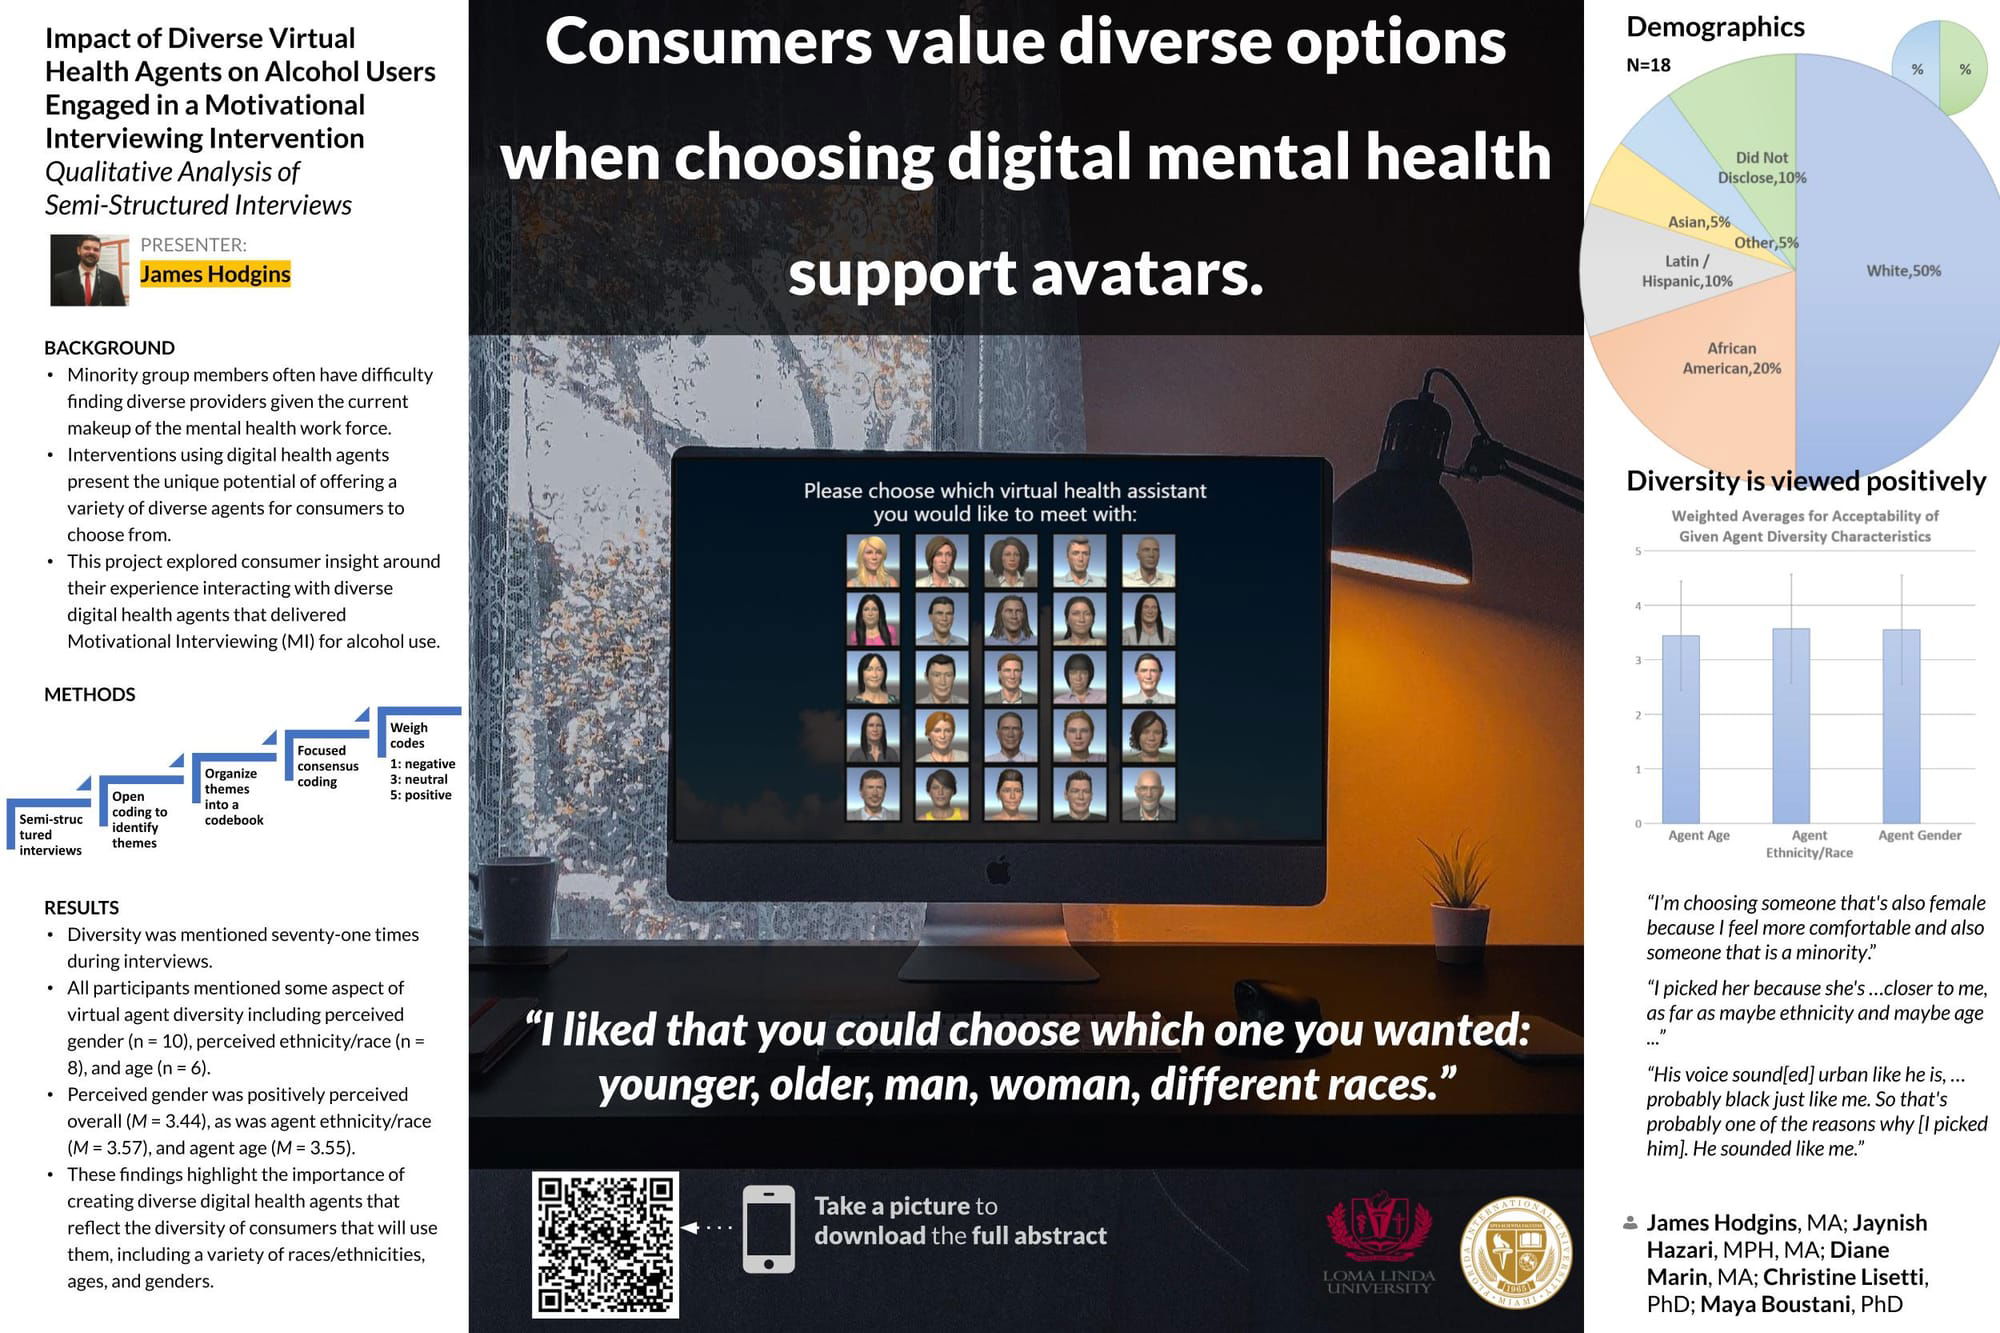 Impact of Diverse Virtual Health Agents on Alcohol Users Engaged in a Motivational Interviewing Intervention: Qualitative Analysis of Semi-Structured Interviews